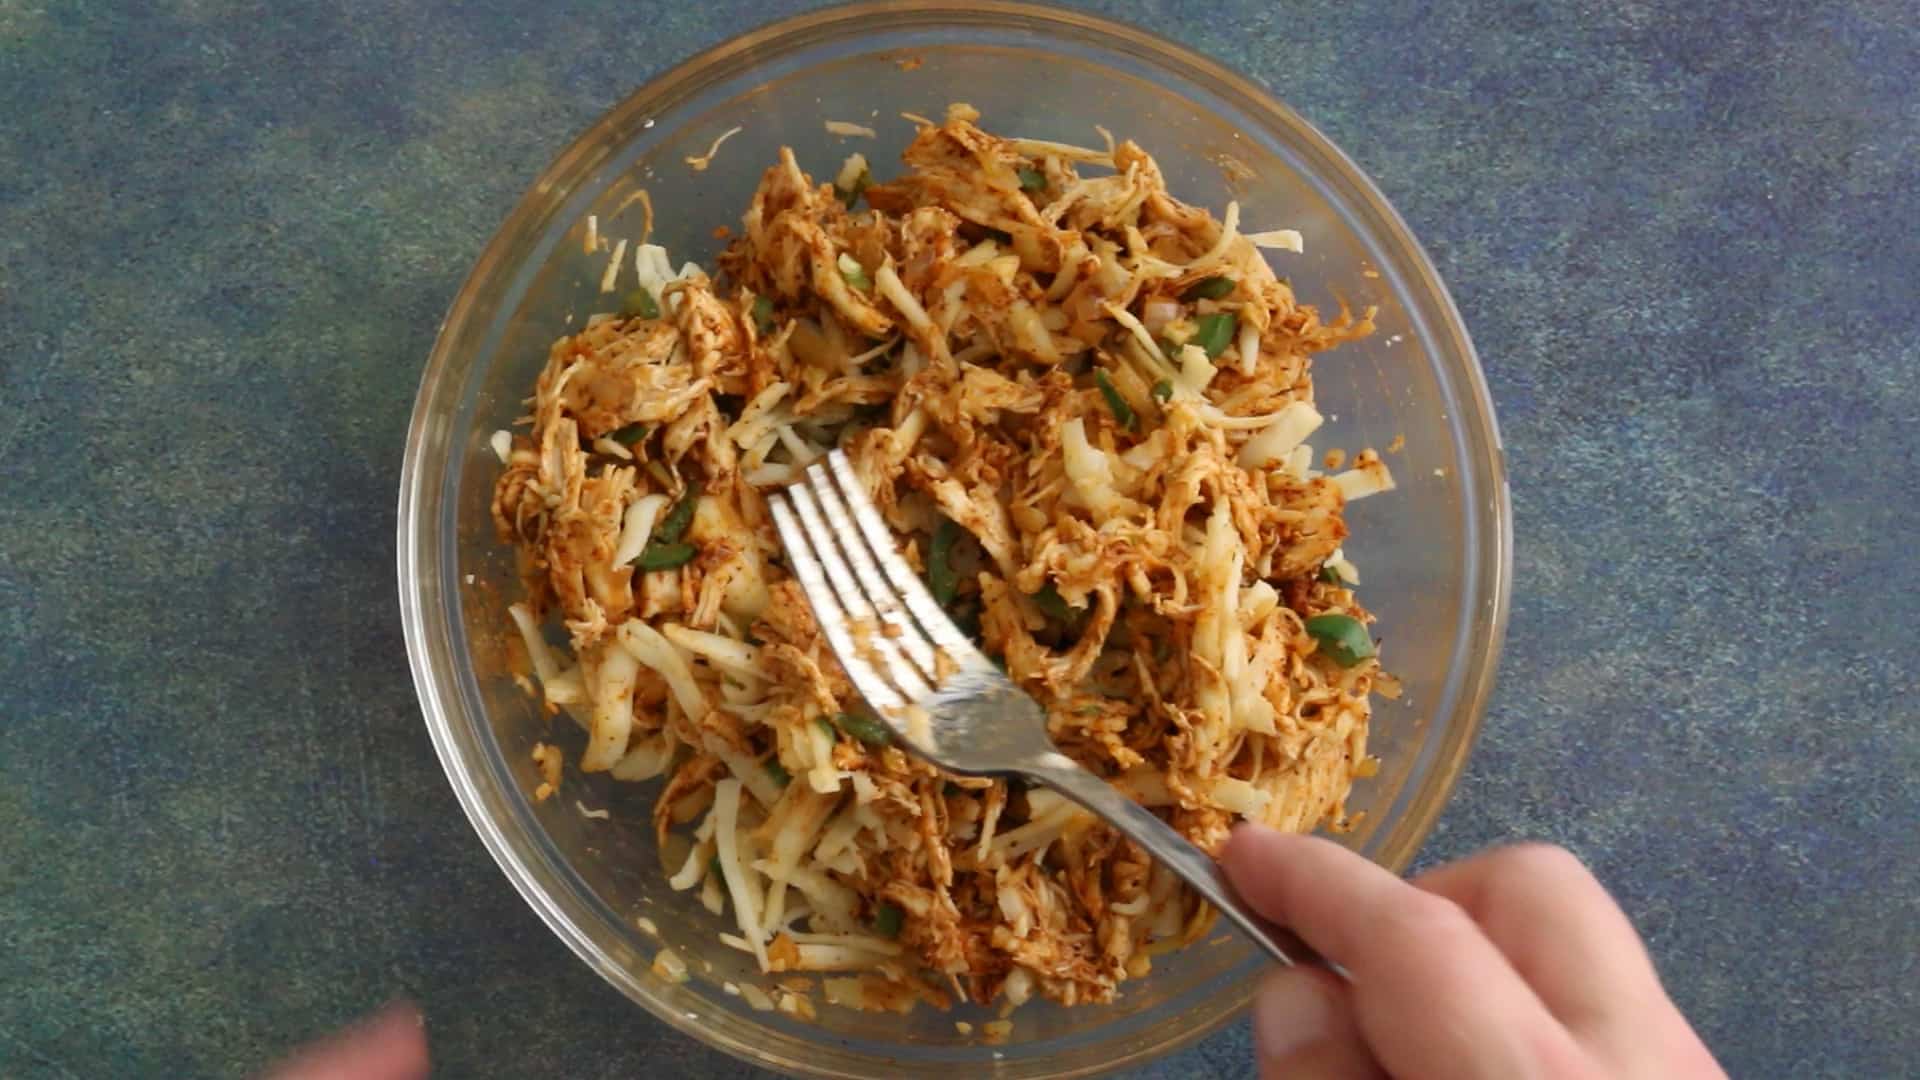 Mixing the seasoned shredded chicken with cheese.